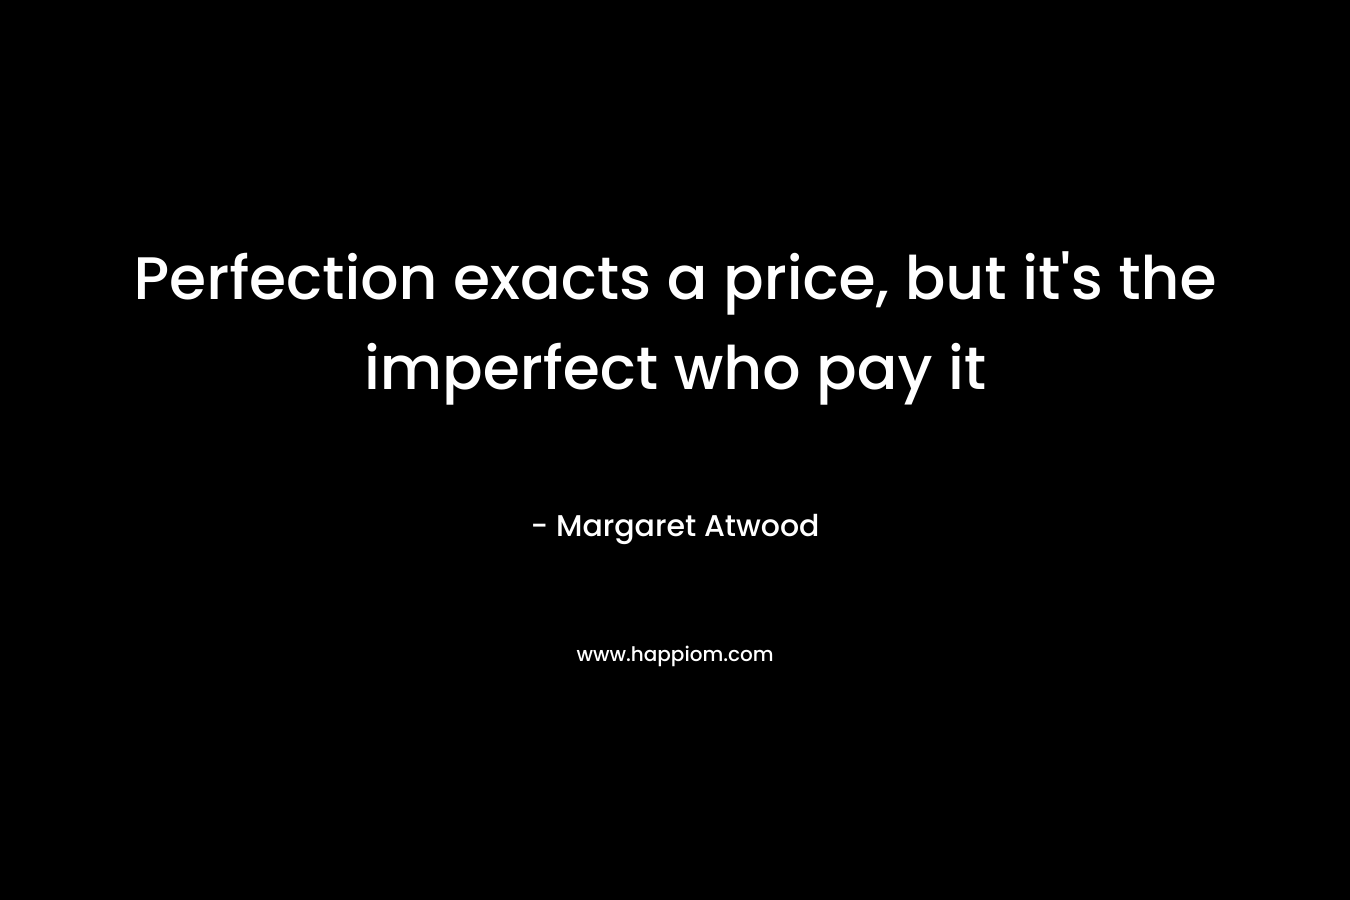 Perfection exacts a price, but it’s the imperfect who pay it – Margaret Atwood